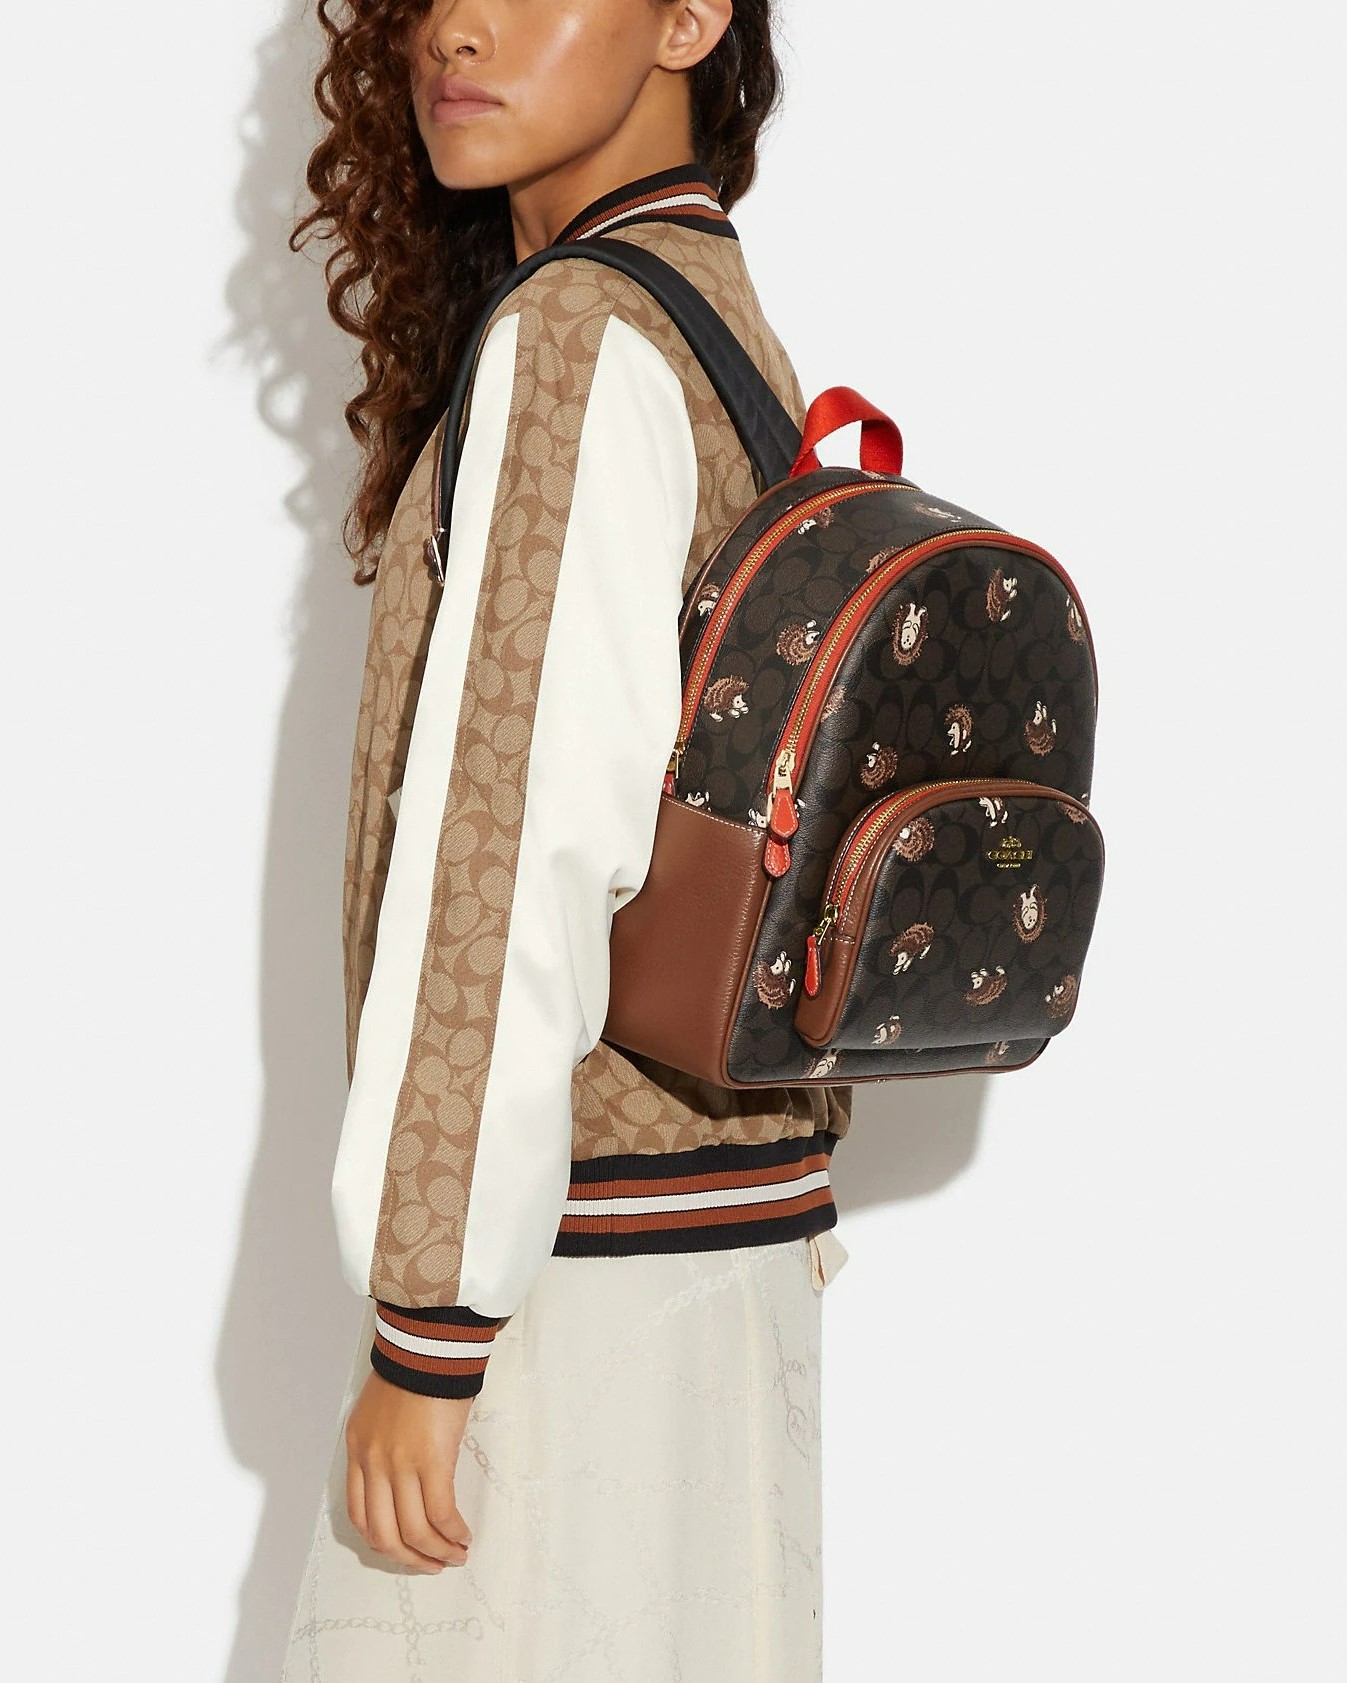 BALO COACH HỌA TIẾT CHÚ NHÍM COURT BACKPACK IN SIGNATURE CANVAS WITH HEDGEHOG PRINT 3